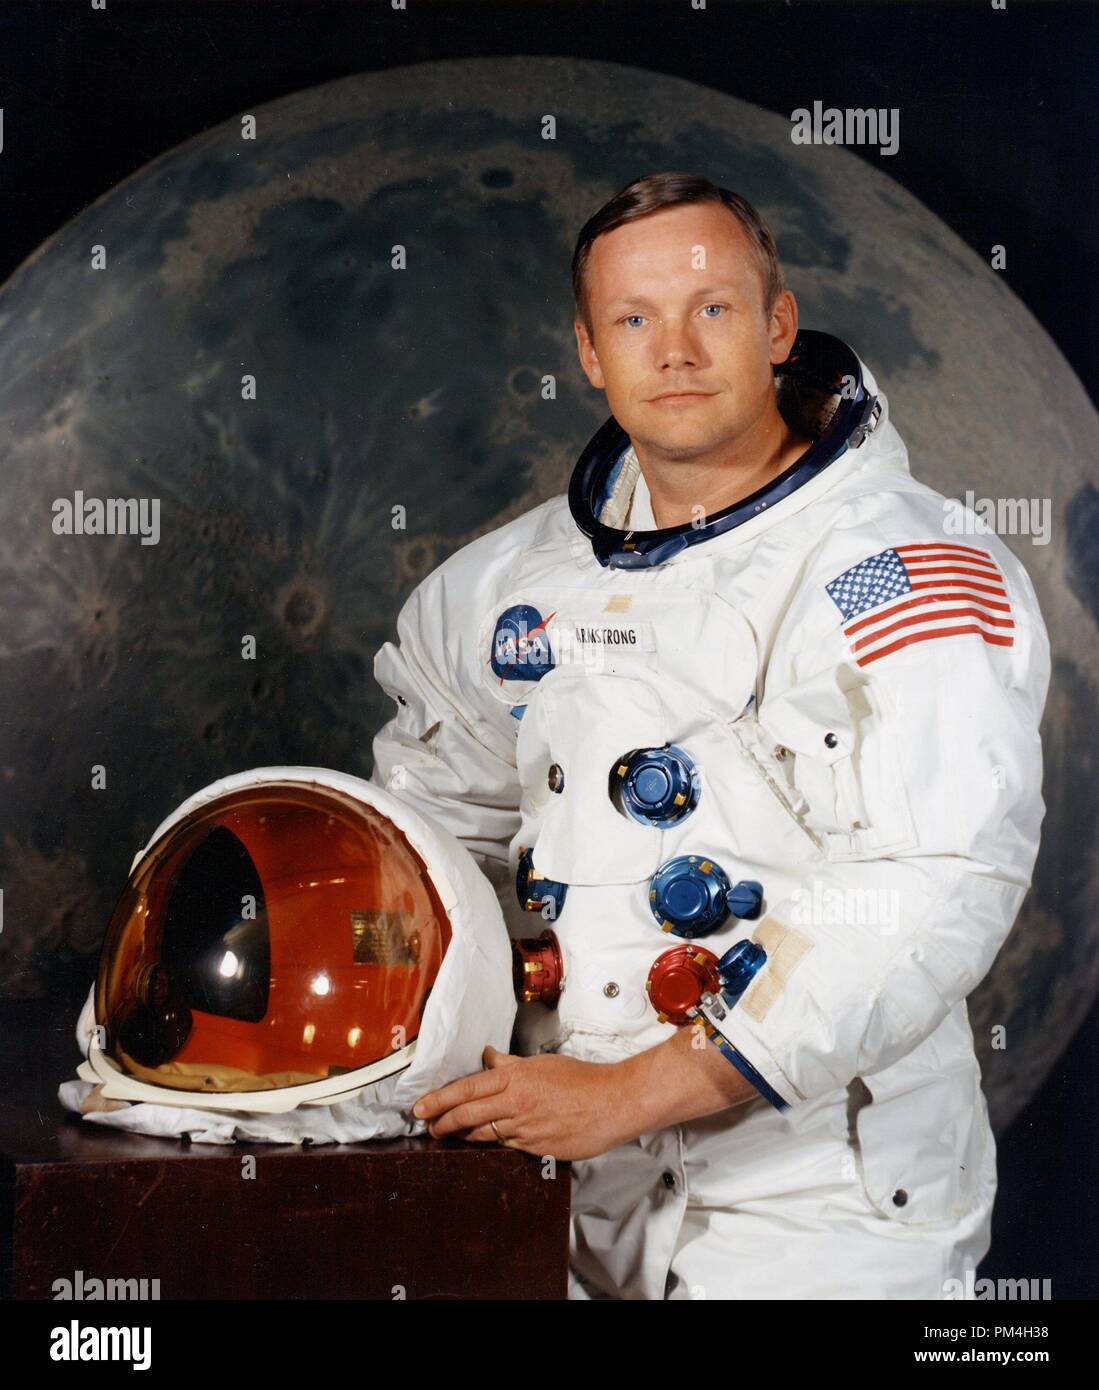 Portrait of Astronaut Neil A. Armstrong, commander of the Apollo 11 Lunar Landing mission in his space suit, with his helmet on the table in front of him. Behind him is a large photograph of the lunar surface.July 1, 1969  File Reference # 1003 201THA Stock Photo